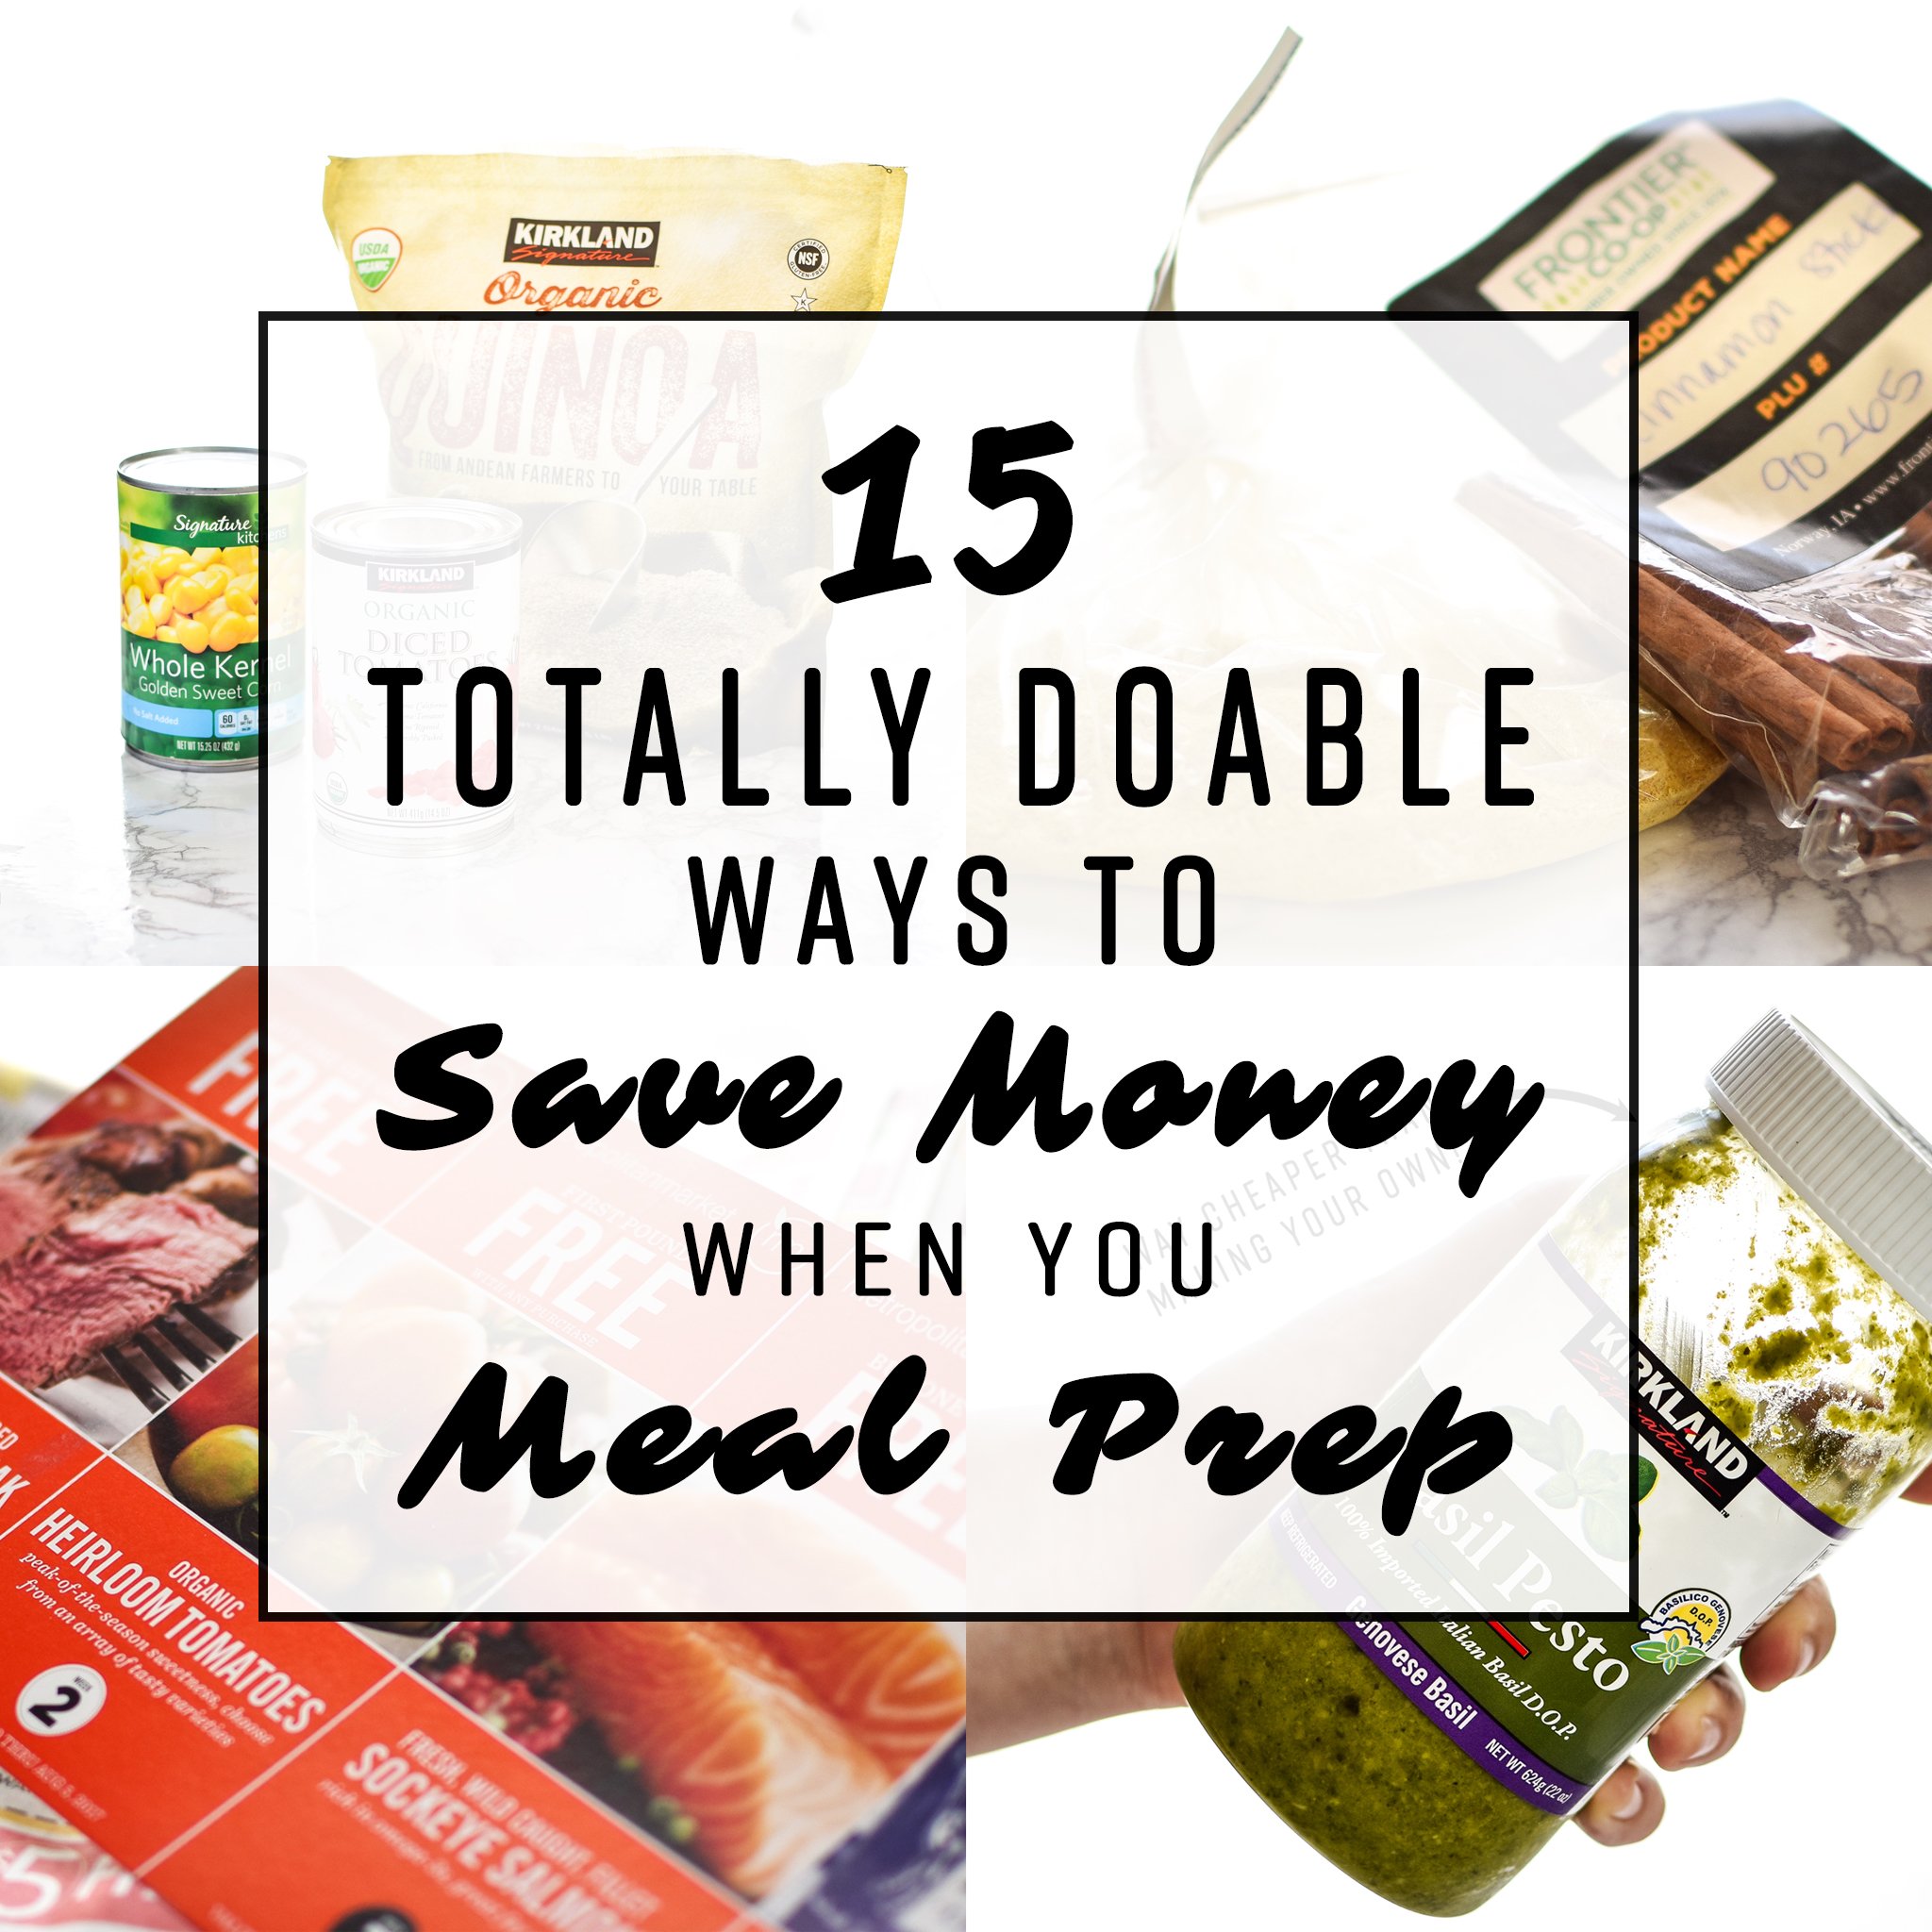 15 Totally Doable Ways to Save Money When You Meal Prep - Who likes to save money? Everyone! Check out these tips for saving on your meal prep. - ProjectMealPlan.com